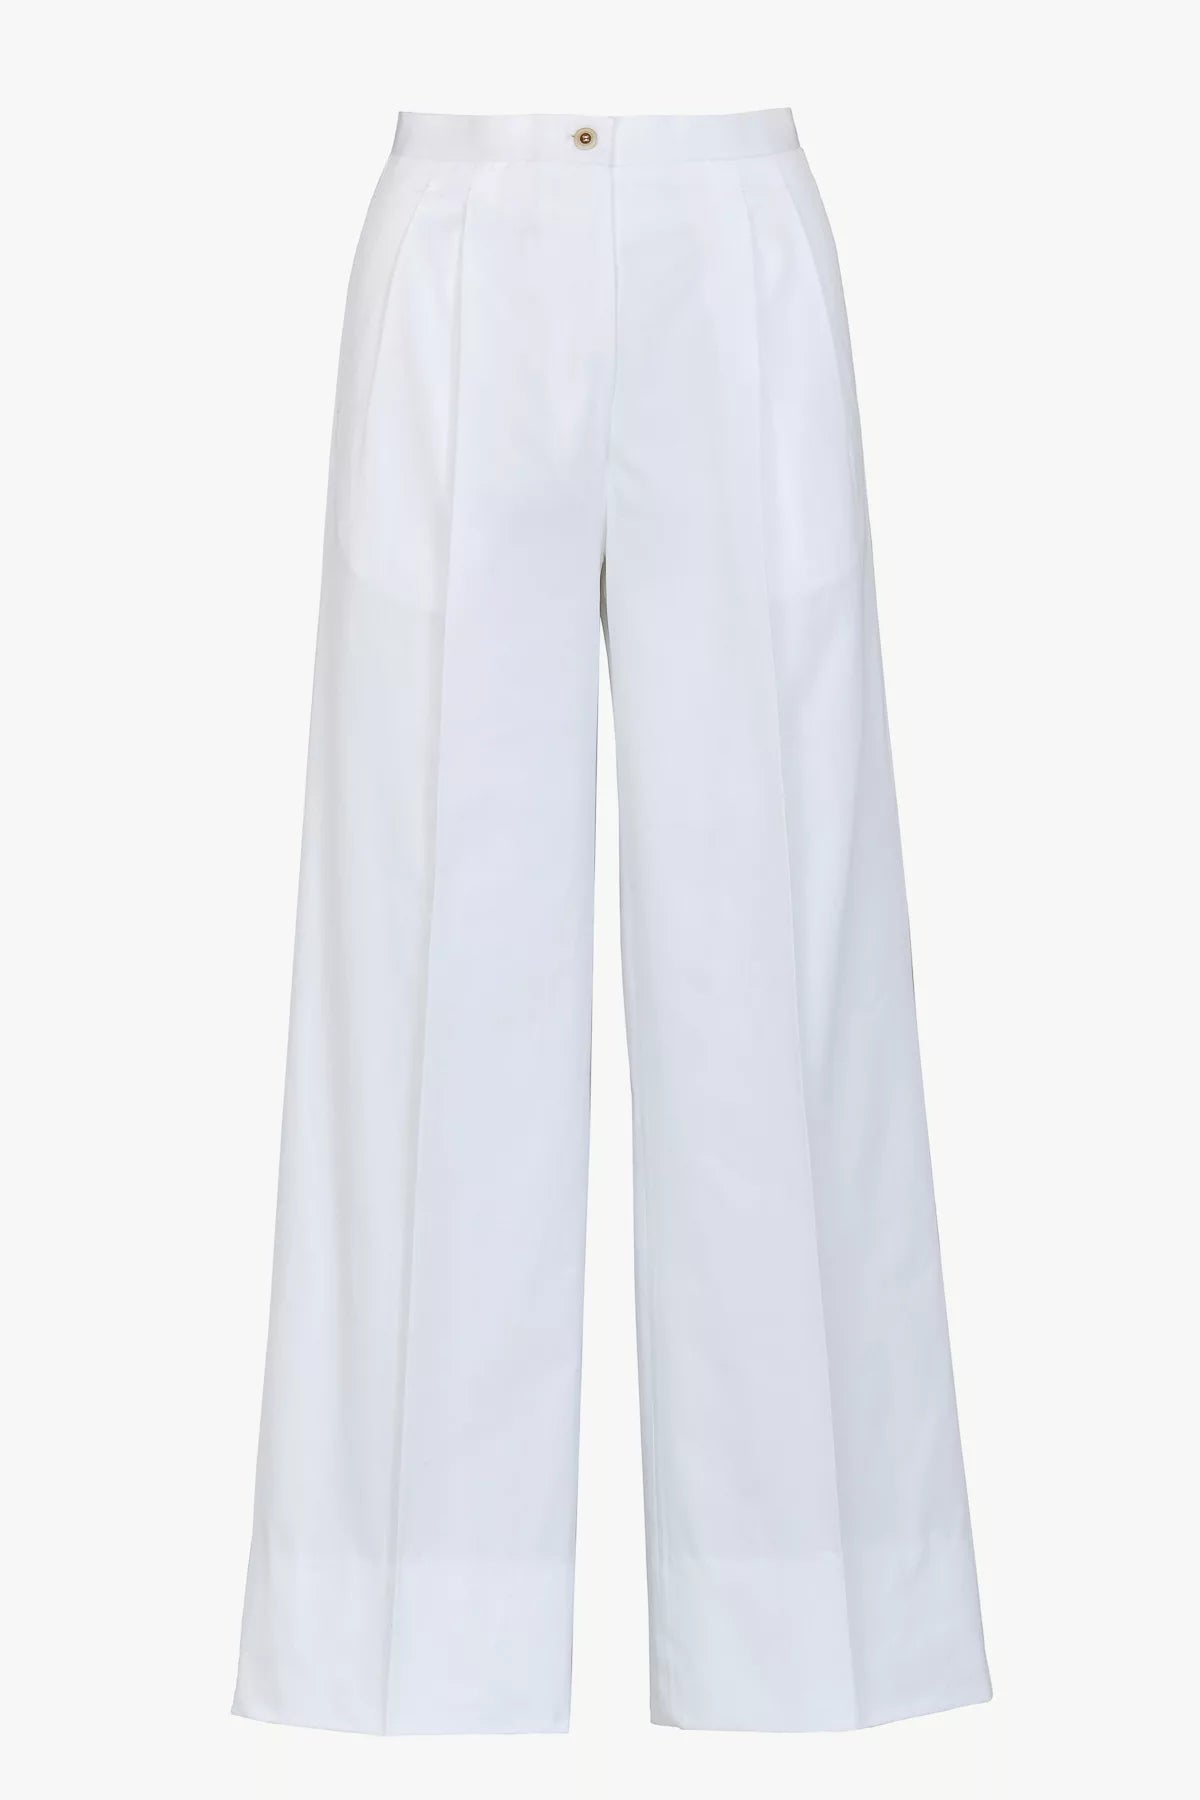 Giuliva-Heritage-The-Elsa-Trousers-Cotton-Twill_Optical-White-Amarees